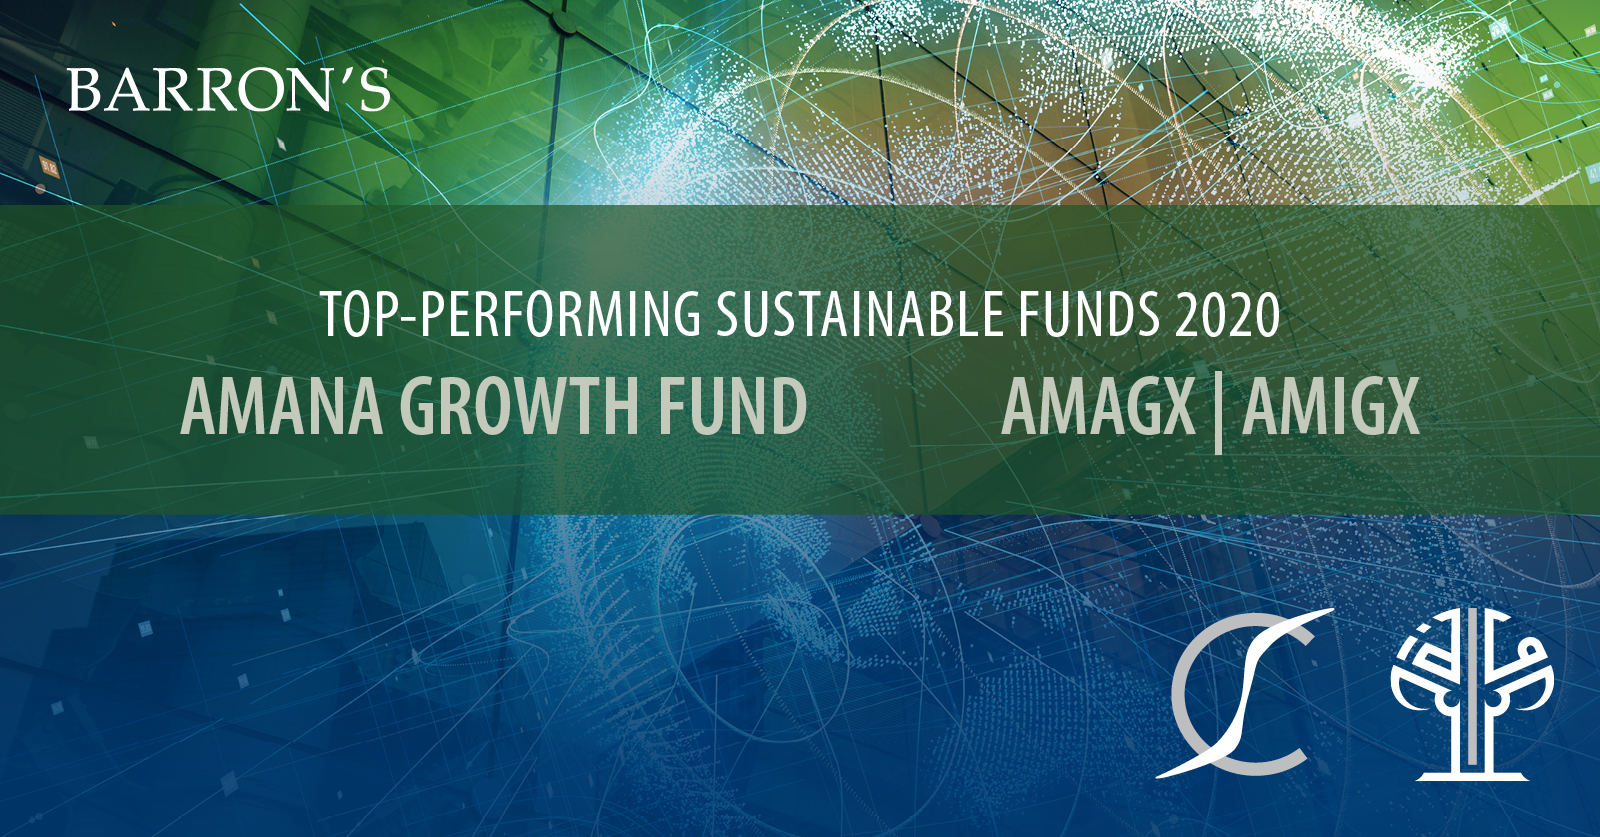 Barron's Top-Performing Sustainable Funds: Amana Growth Fund